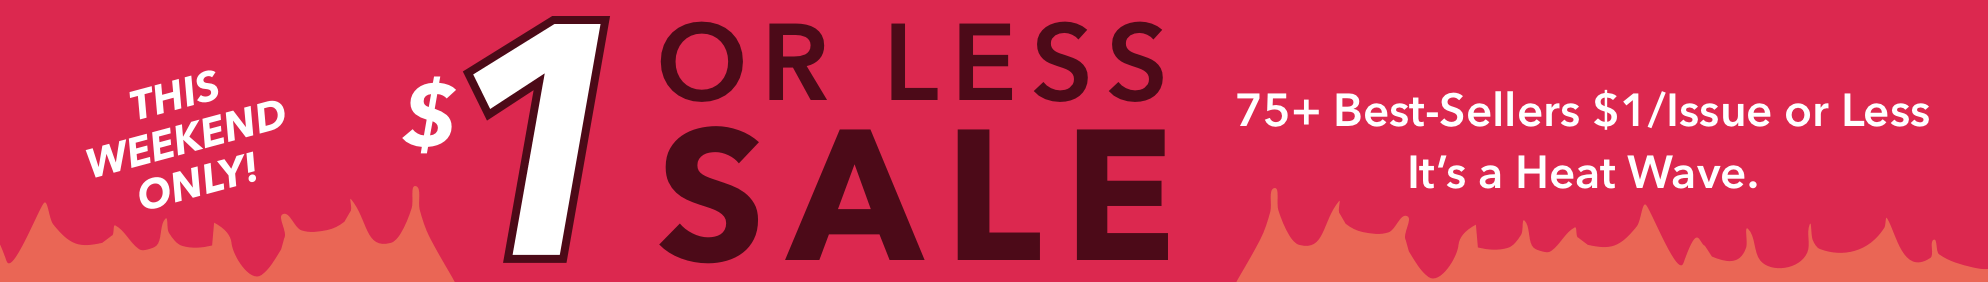 The All Issues $1 or Less Sale June 21